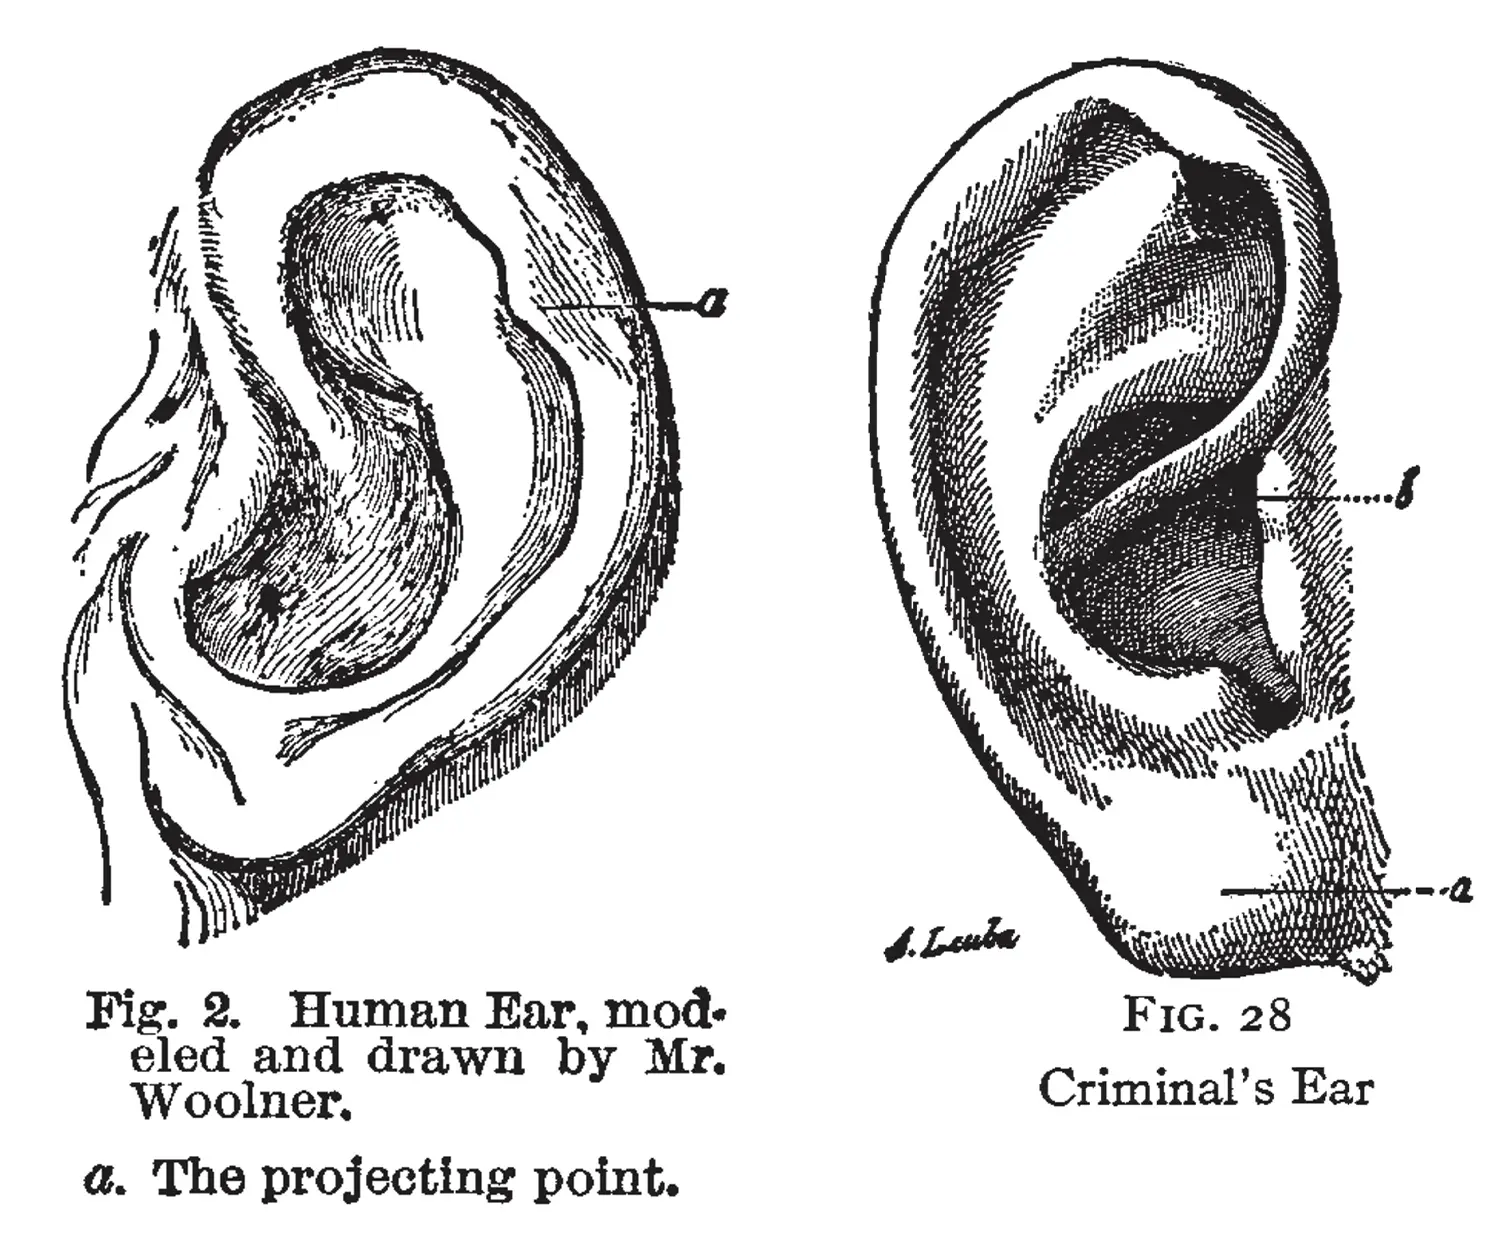 Two drawings of human ears. On the left one, a notch in the outer ear labeled as “The projecting point”. On the right, there is an ear with a tubercle labeled “criminal’s ear.”
